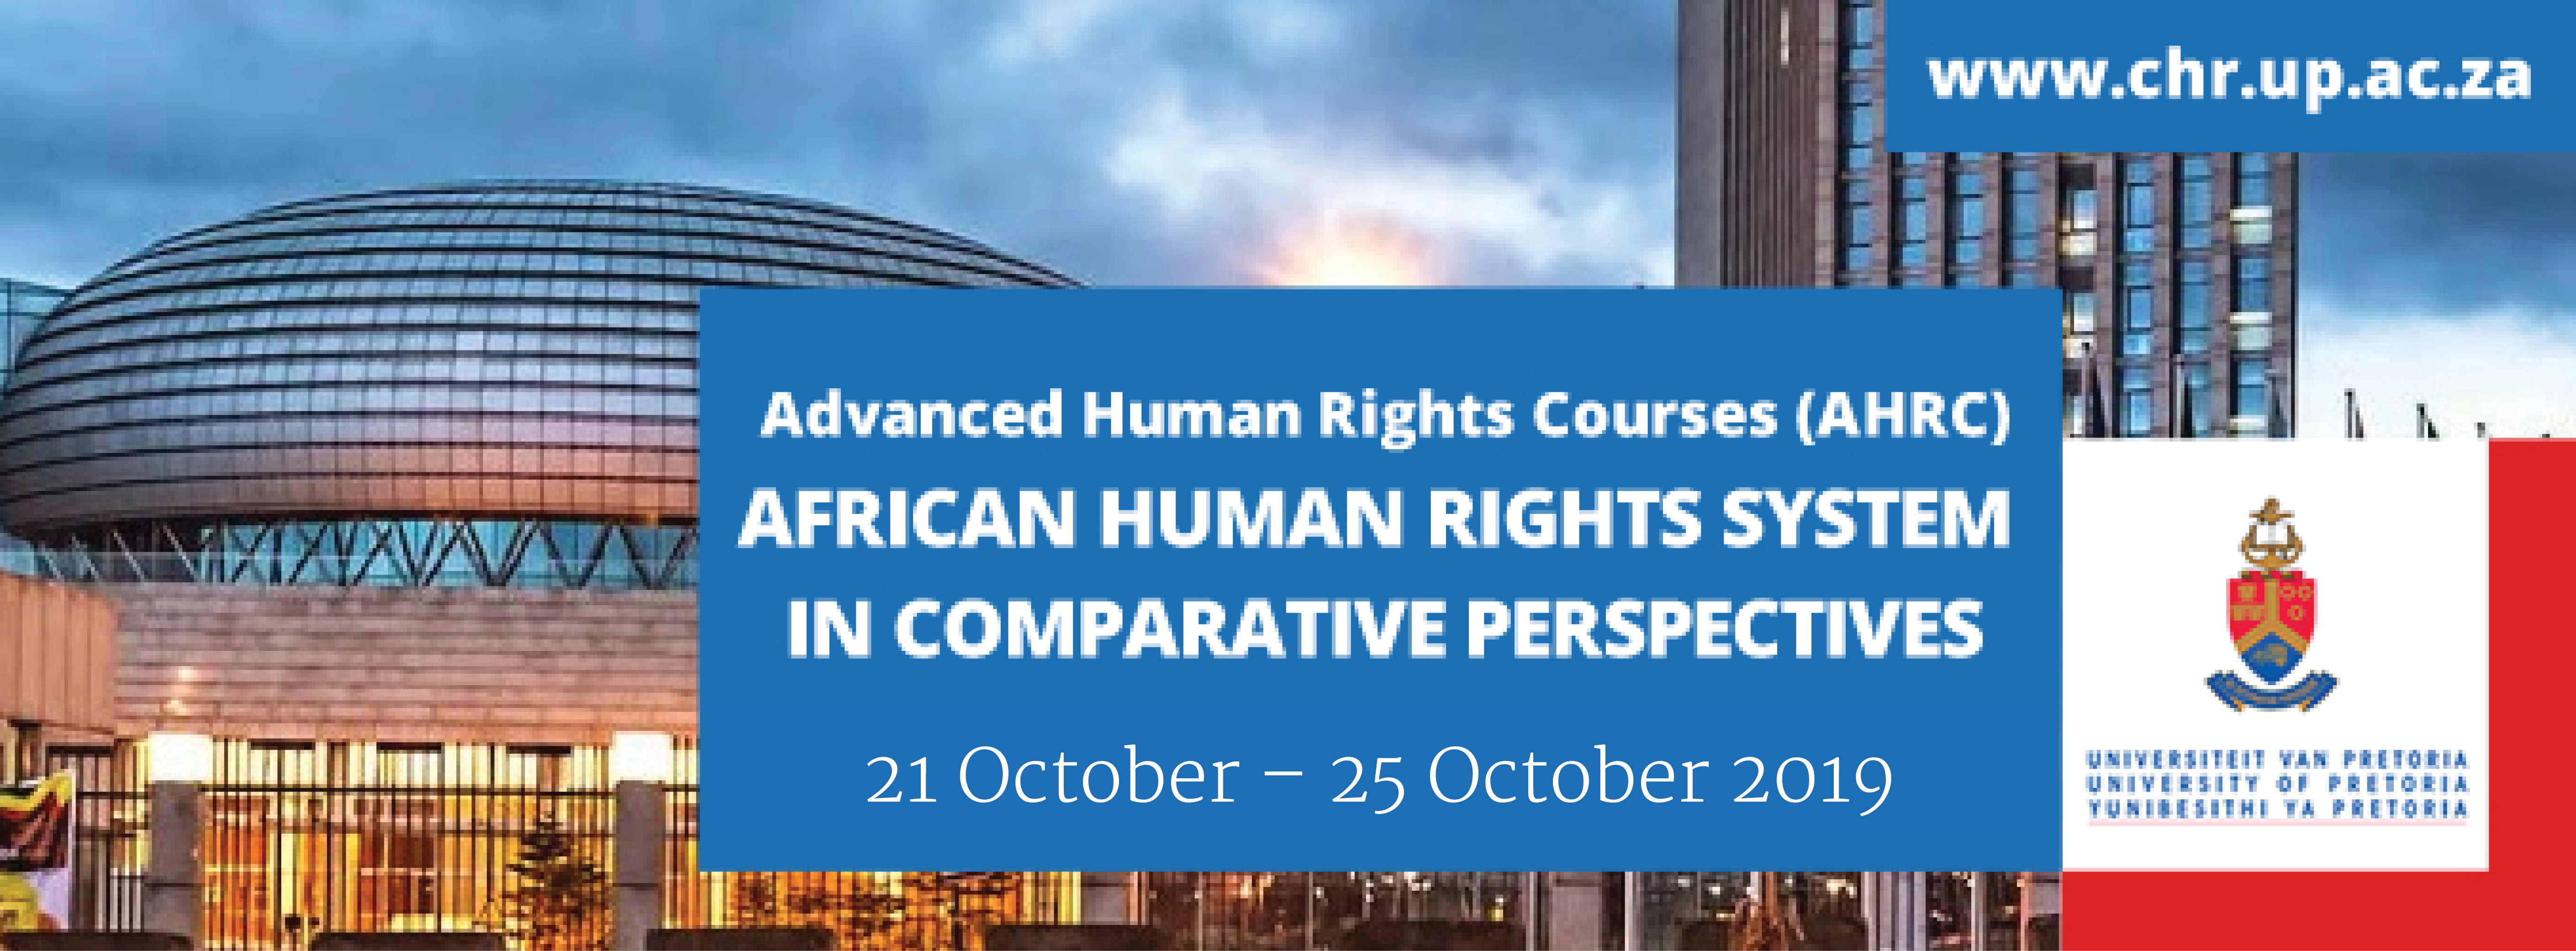 african human rights system in comparative perspectives